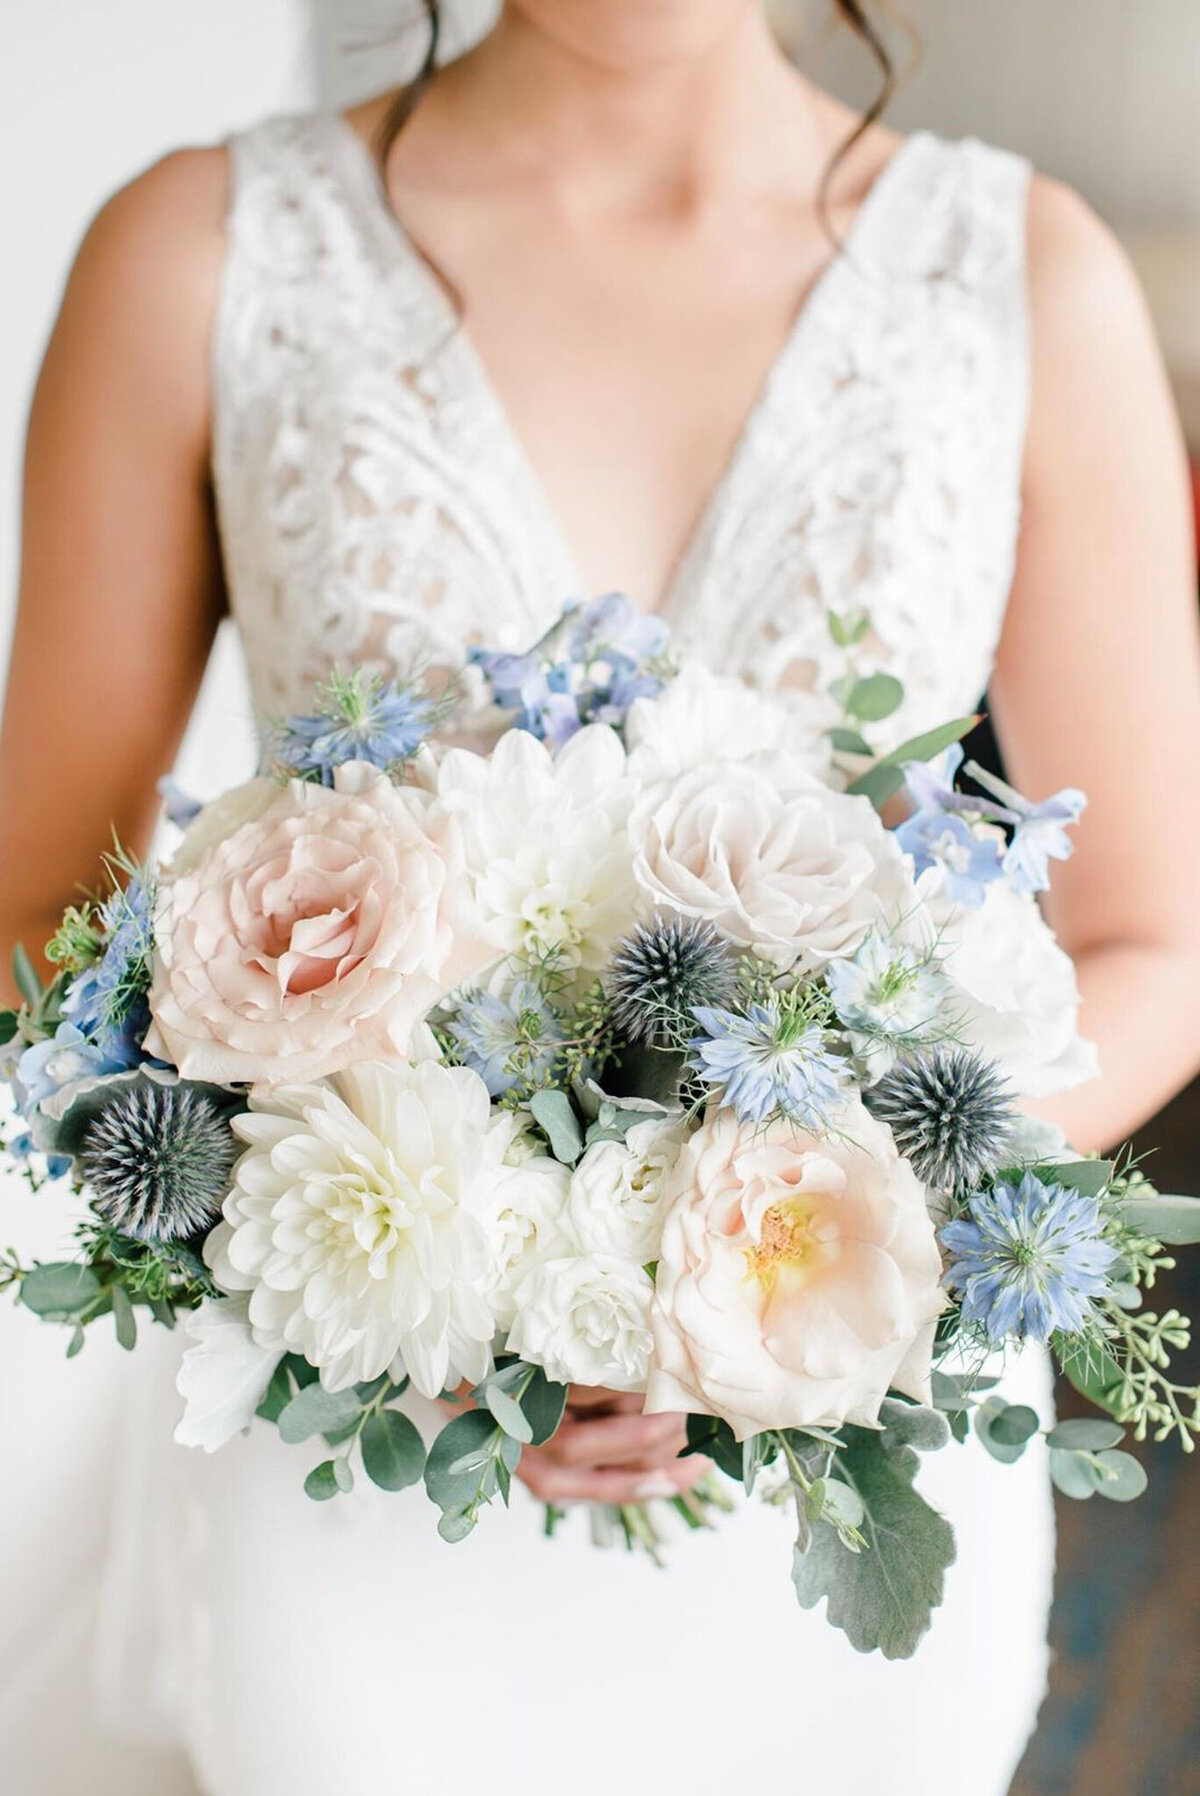 Classic bridal bouquet with pink, white and blue florals by Flowers By Janie, artful Calgary, Alberta wedding florist, featured on the Brontë Bride Vendor Guide.